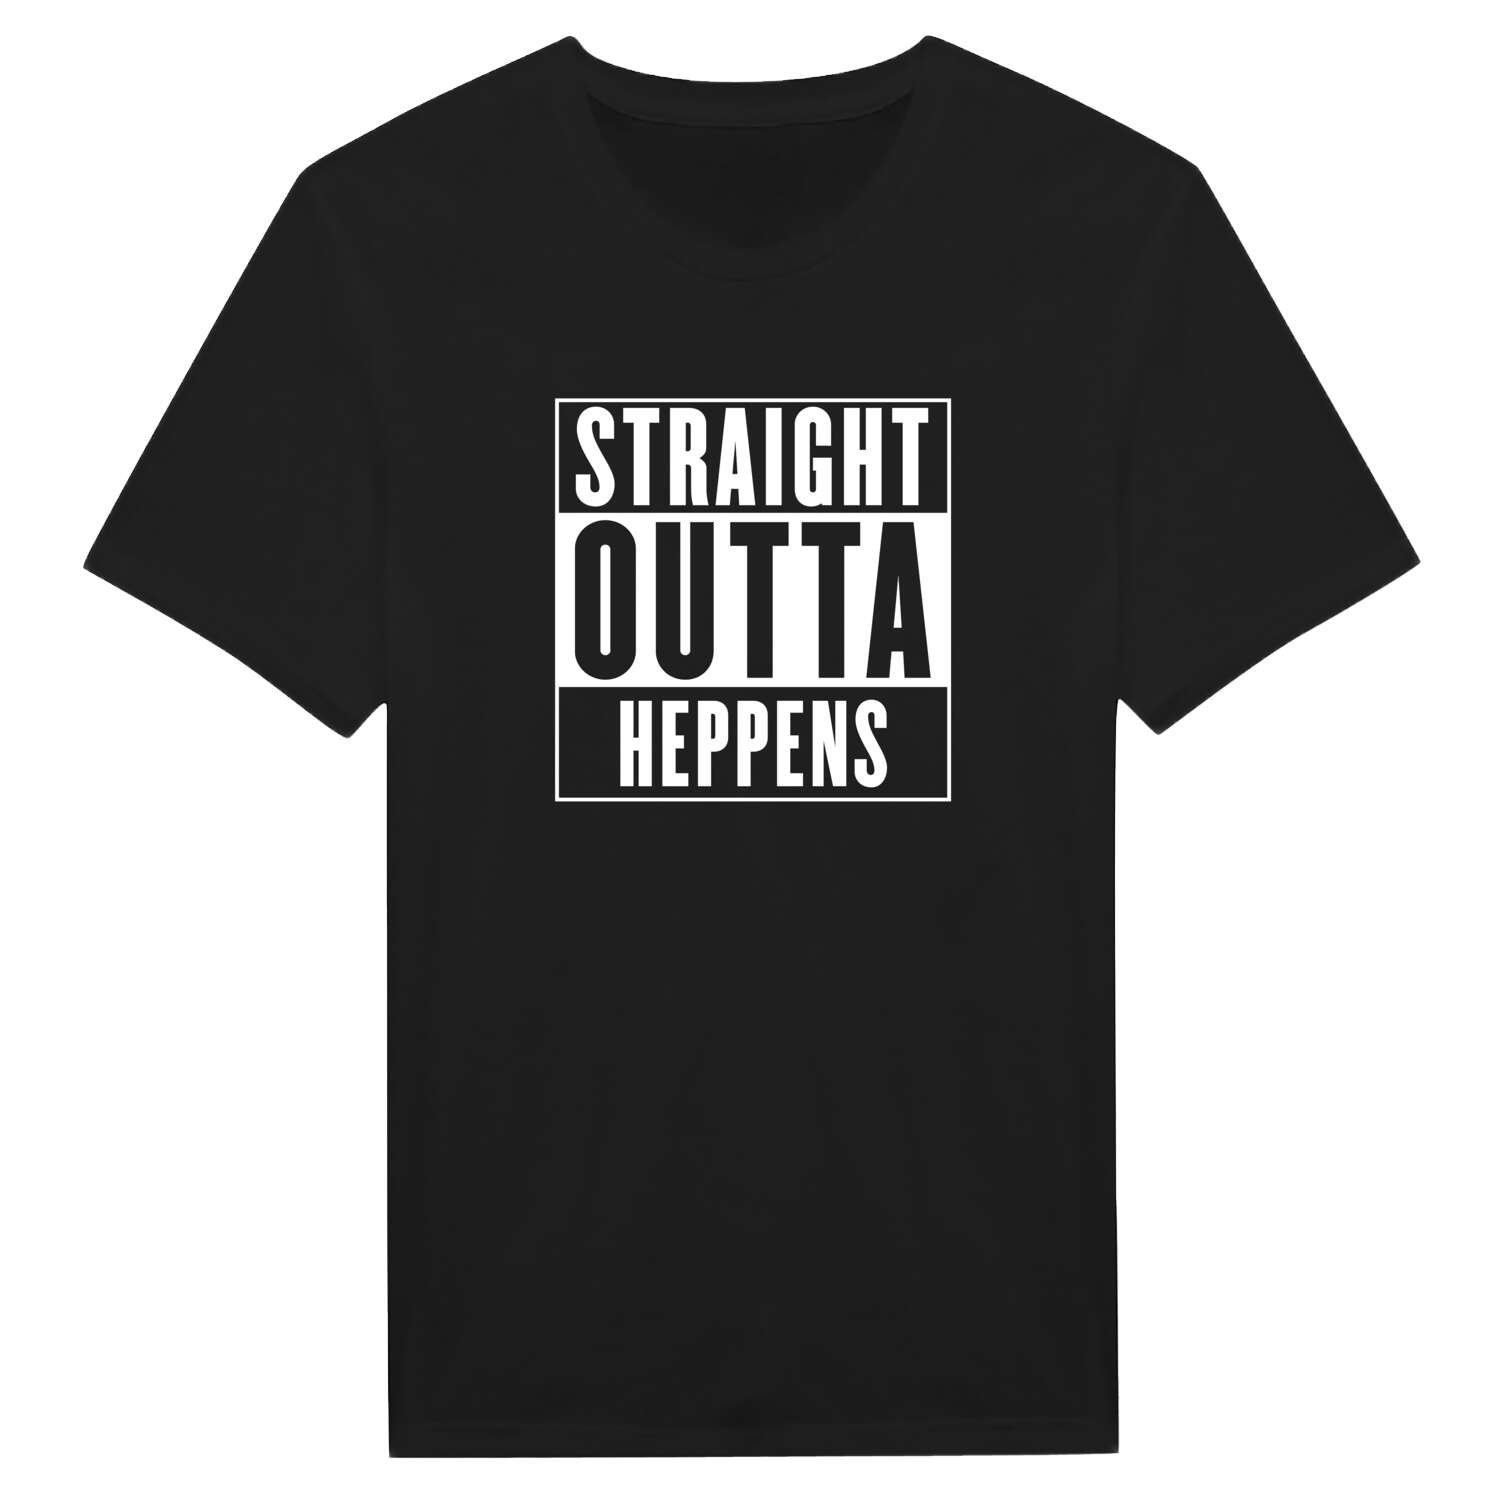 Heppens T-Shirt »Straight Outta«